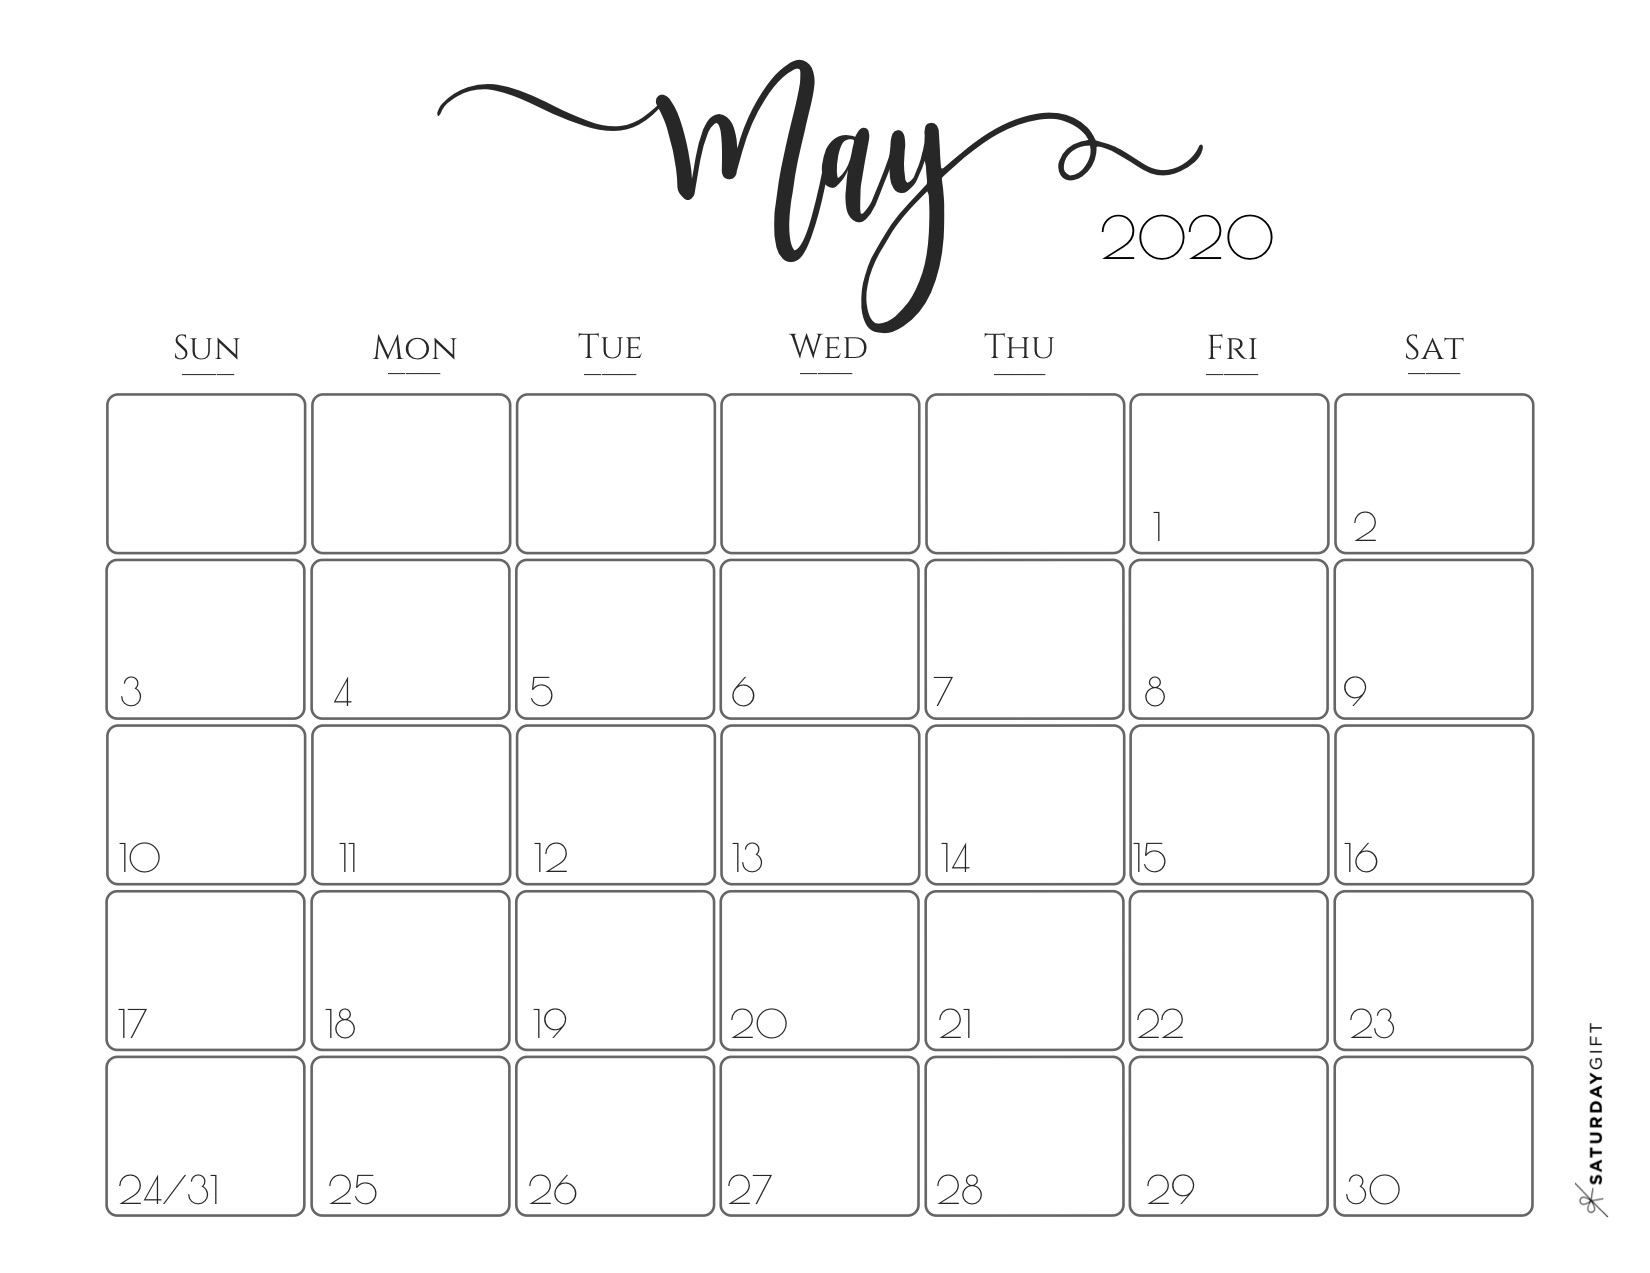 33 Printable Free May 2020 Calendars With Holidays - Onedesblog